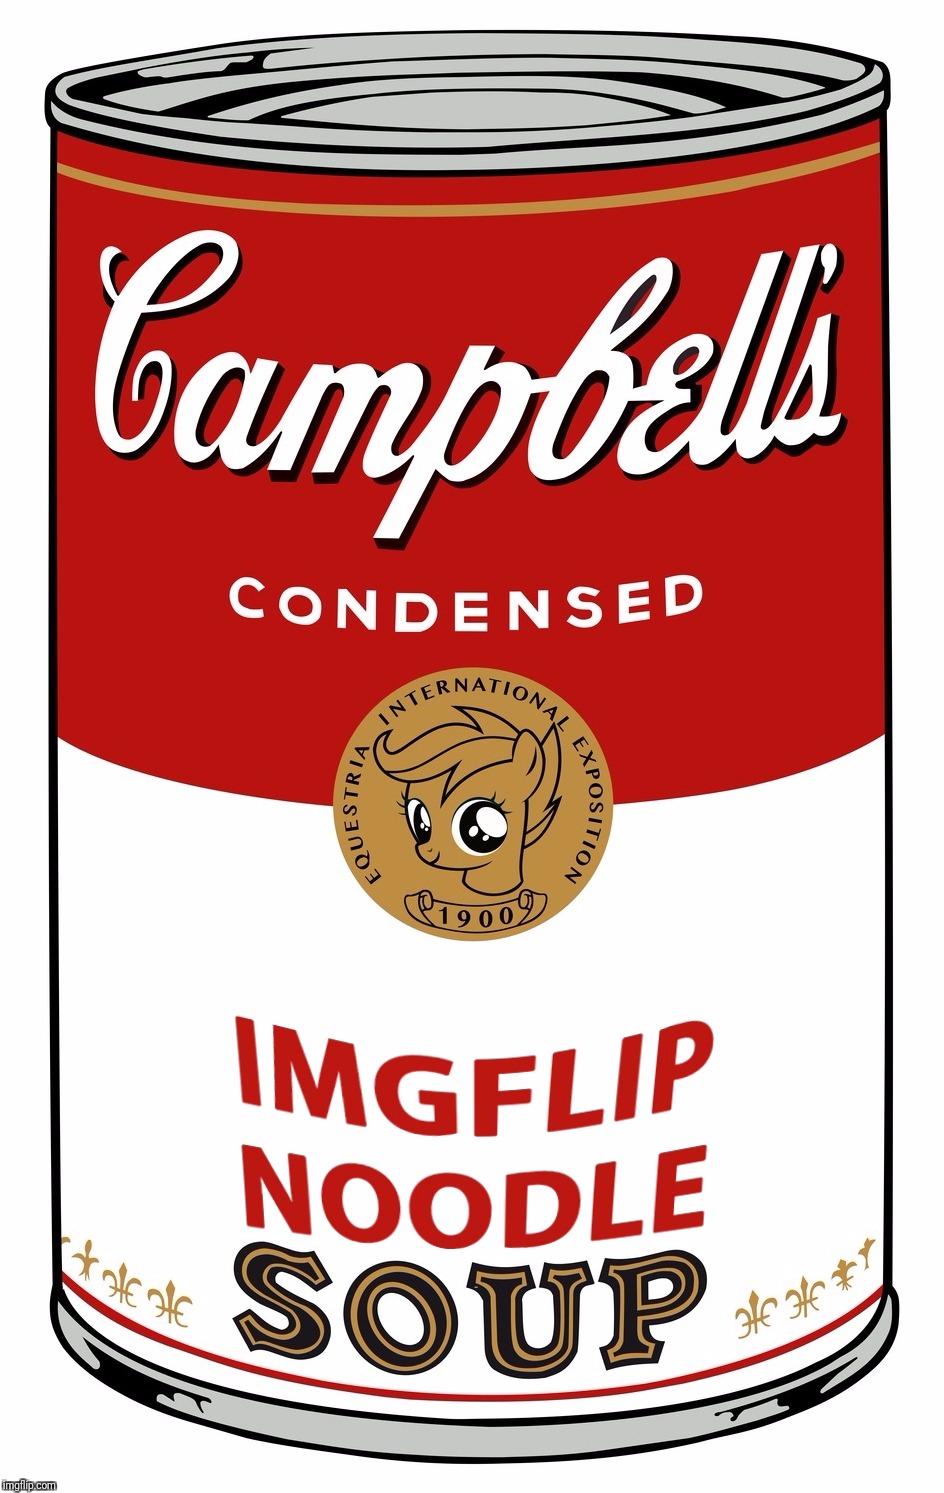 Anonymous Meme Week.  This one goes out to all inactive imgflip users.  Anyone remember headfoot? | IMGFLIP NOODLE SOUP | image tagged in imgflip noodle soup,anonymous meme week,inactive,imgflip users,headfoot,imgflip history | made w/ Imgflip meme maker